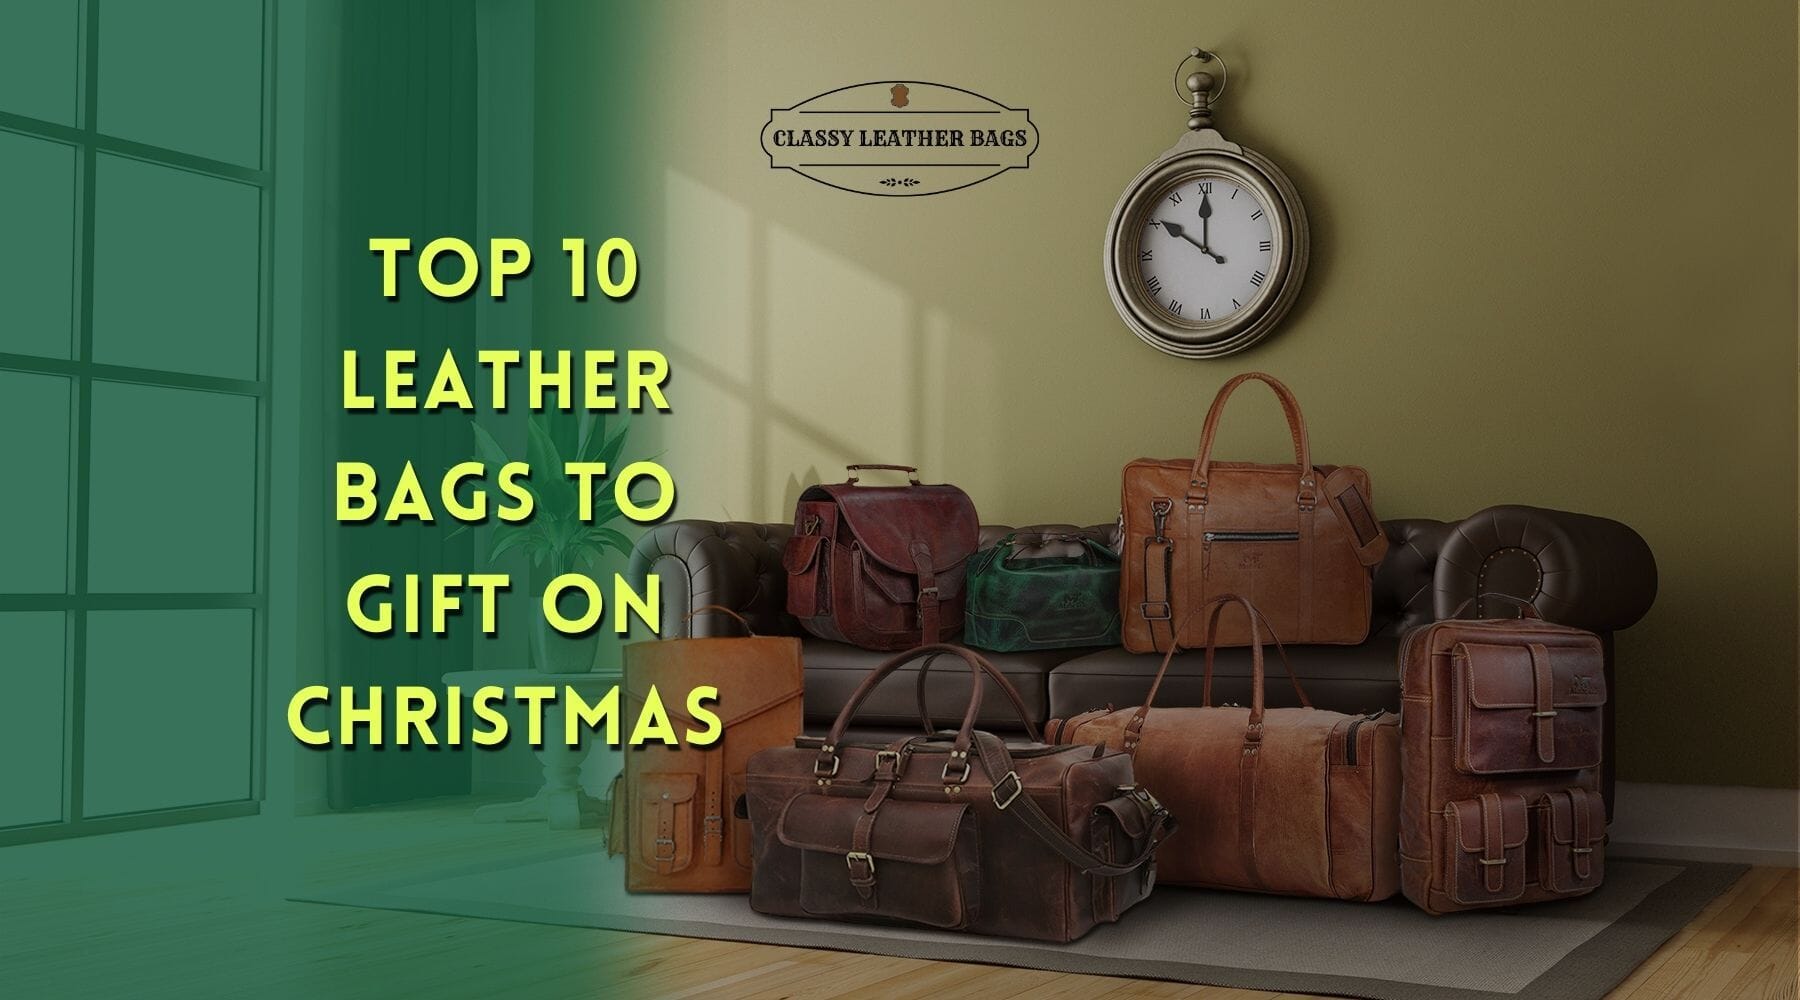 Top 10 Leather bags to gift on Christmas 2020